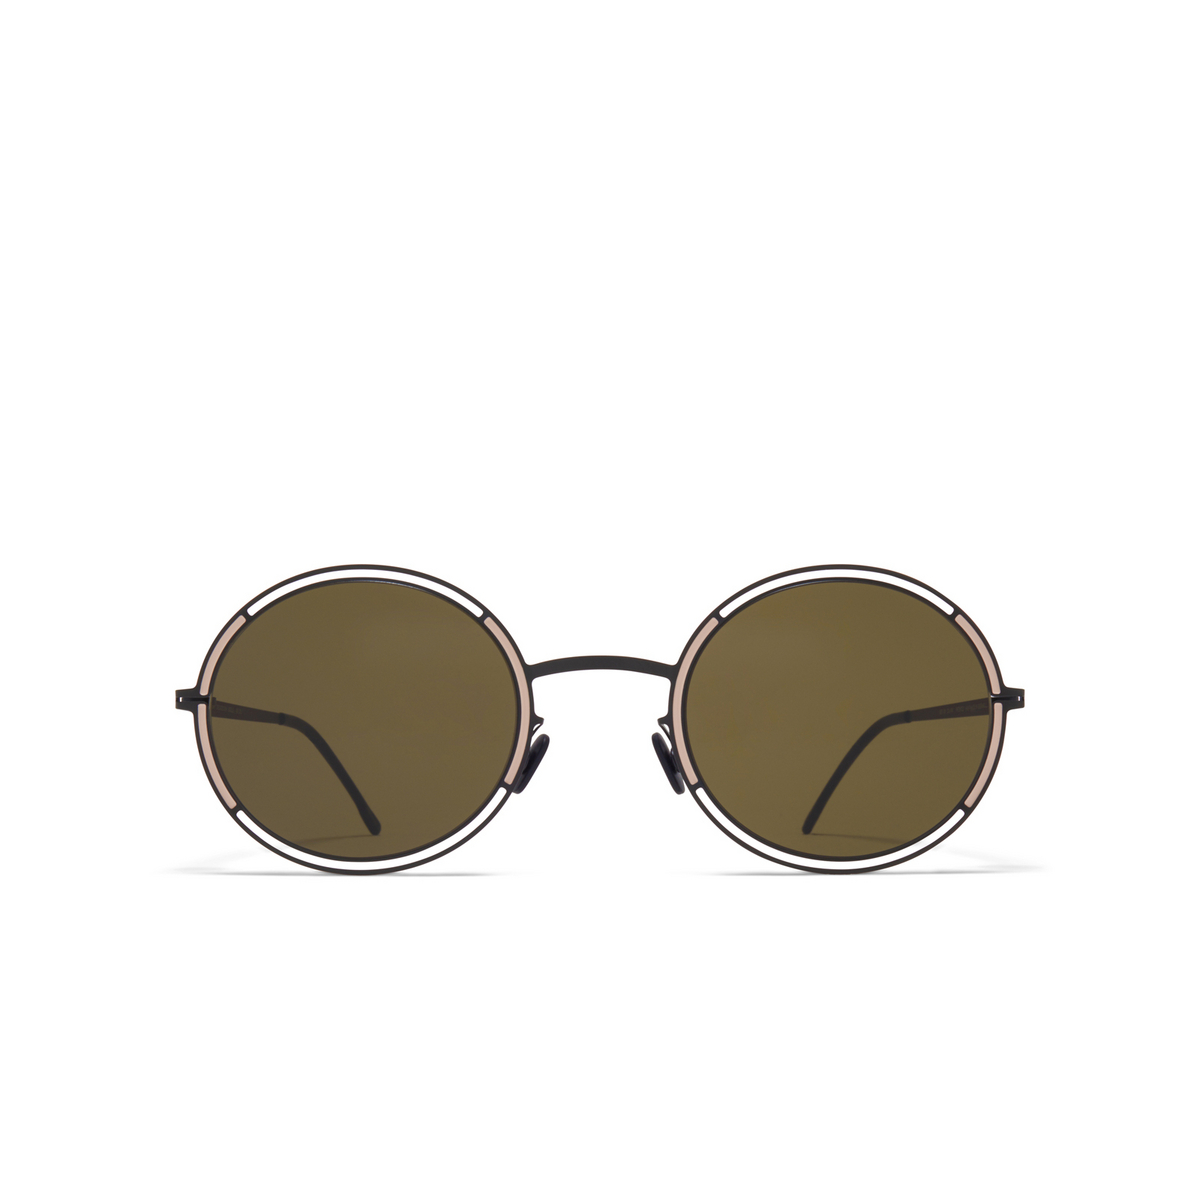 Mykita® Round Sunglasses: Giselle color 404 Black/sand - front view